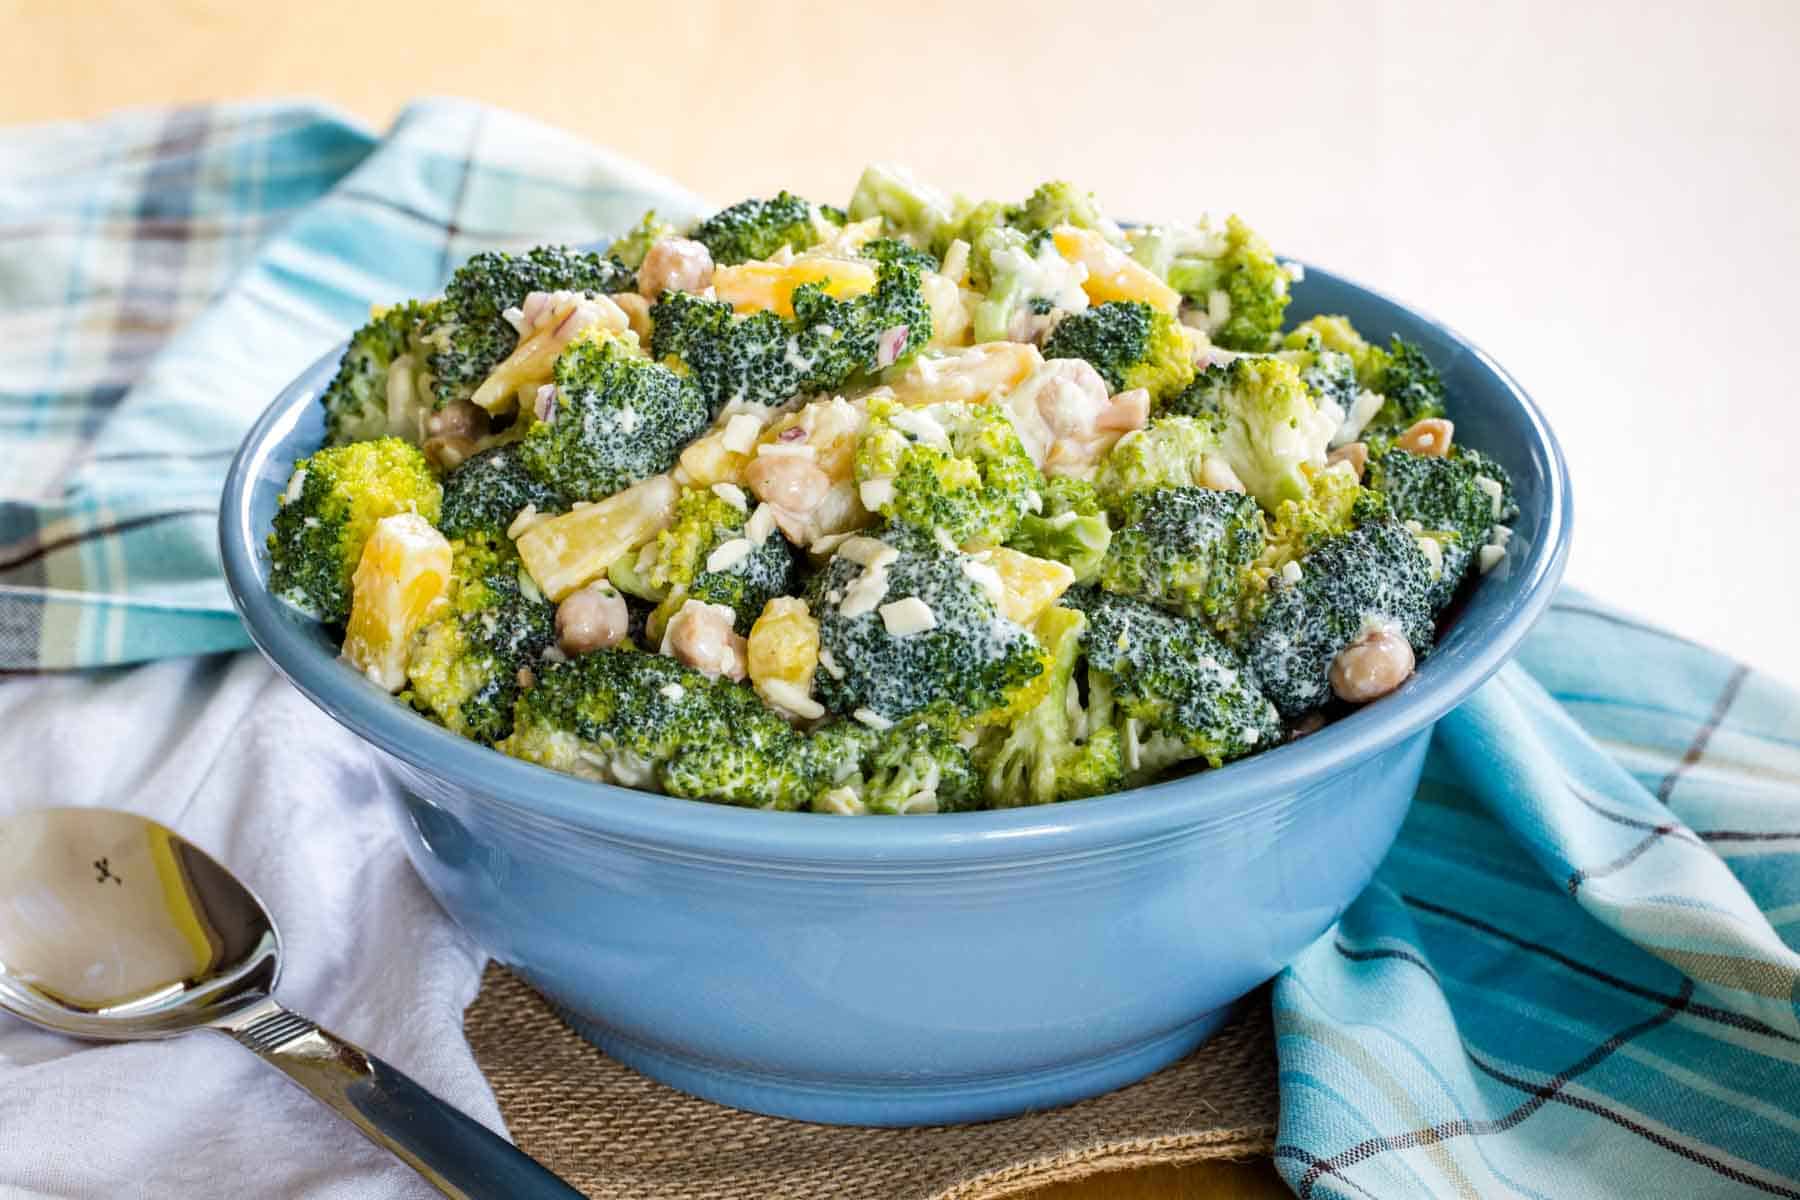 Tropical Broccoli Salad in a blue serving bowl with a spoon.